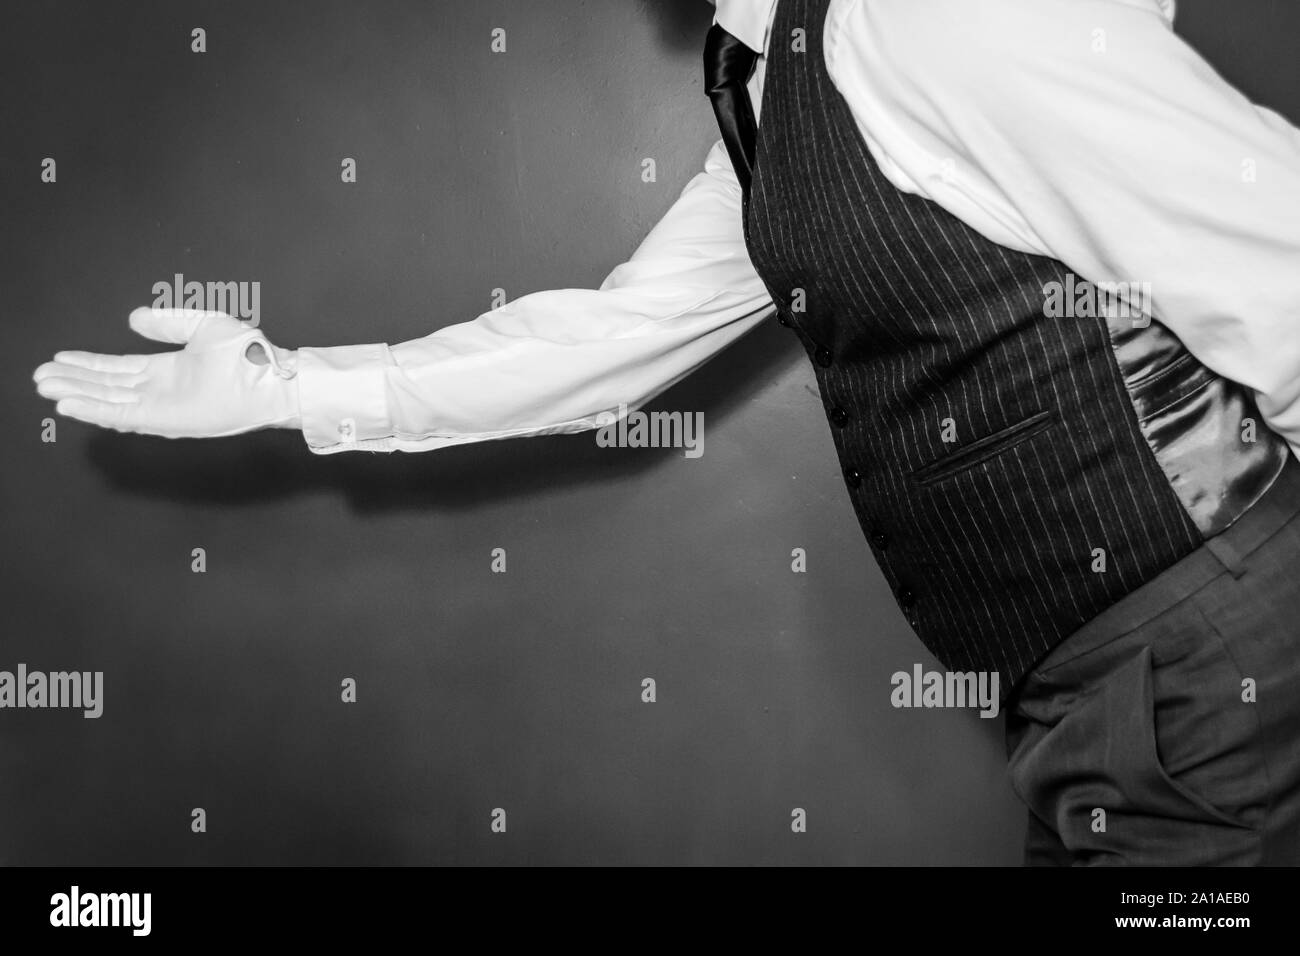 Butler in White Gloves With Welcoming Gesture. Concept of Service Industry and Professional Hospitality and Courtesy. Stock Photo